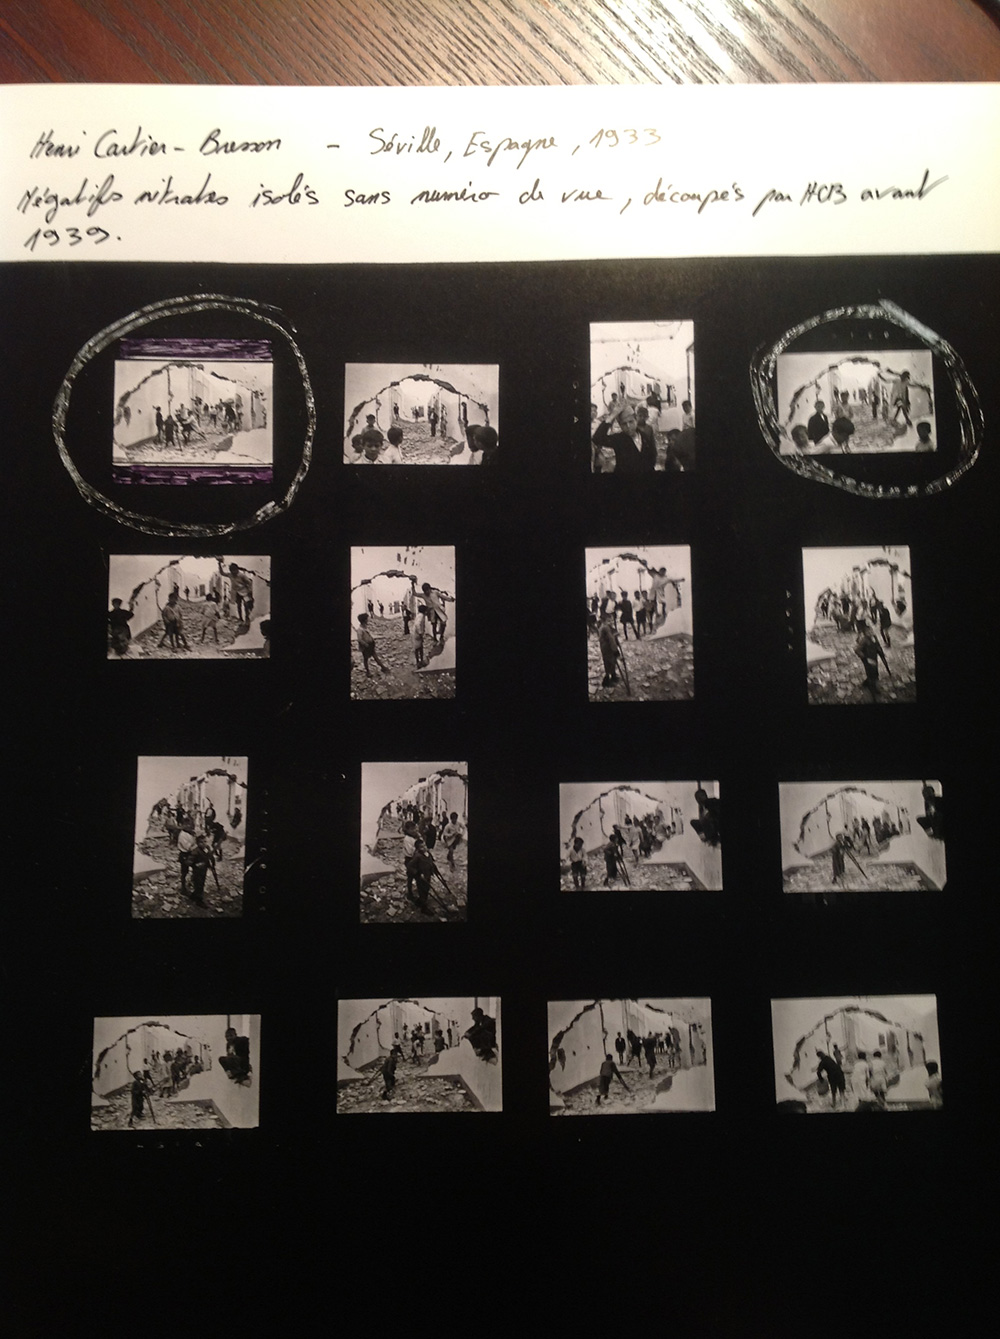 Contact sheet from Henri Cartier-Bresson in Seville, Spain, 1933. © Henri Cartier-Bresson / Magnum Photos